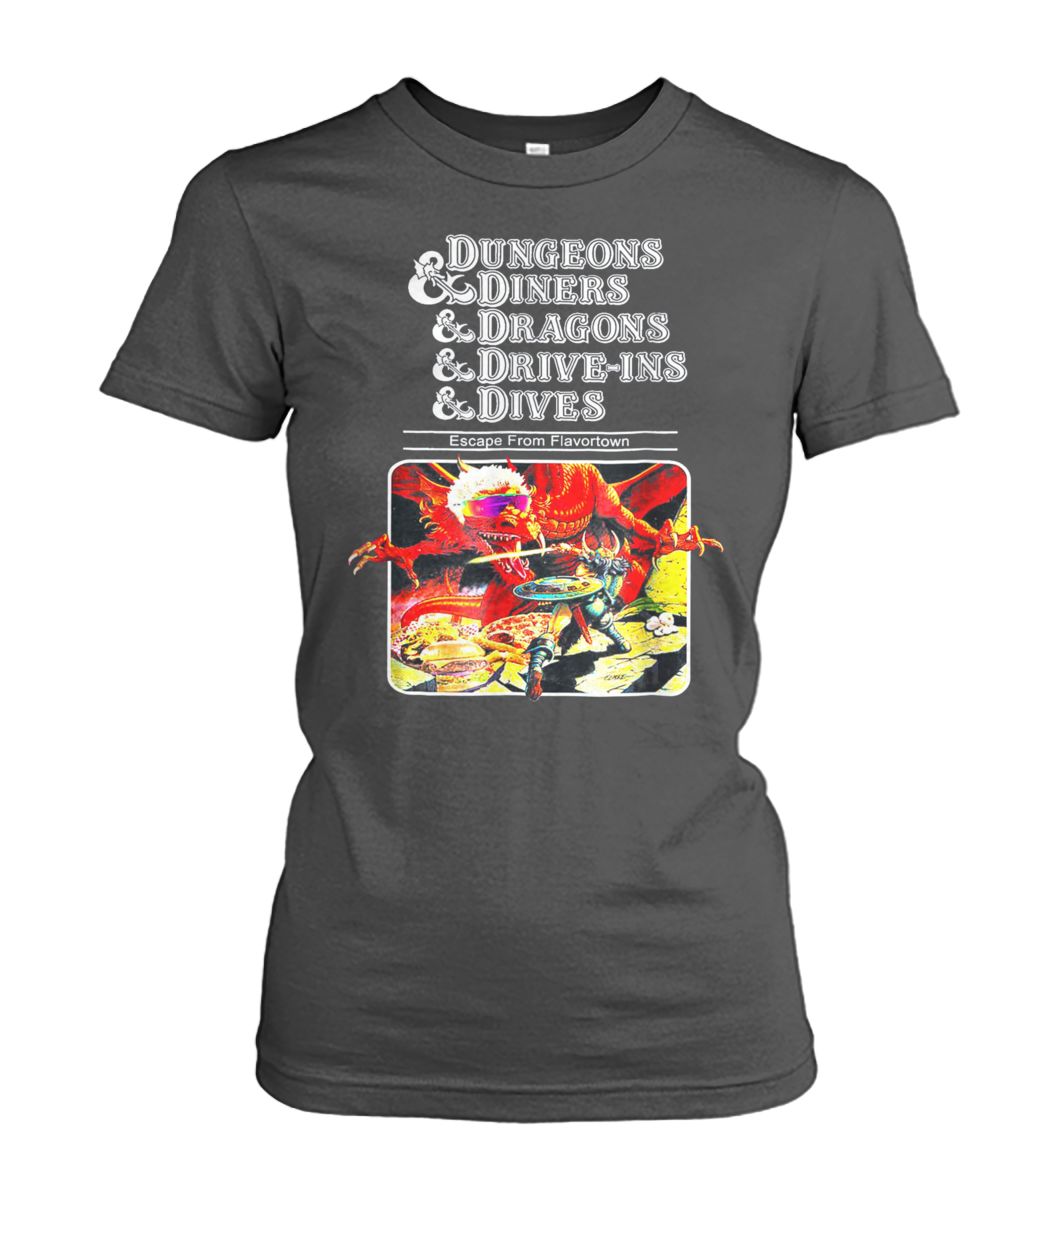 Dungeons and diners dragons drive-ins dives slightly women's crew tee